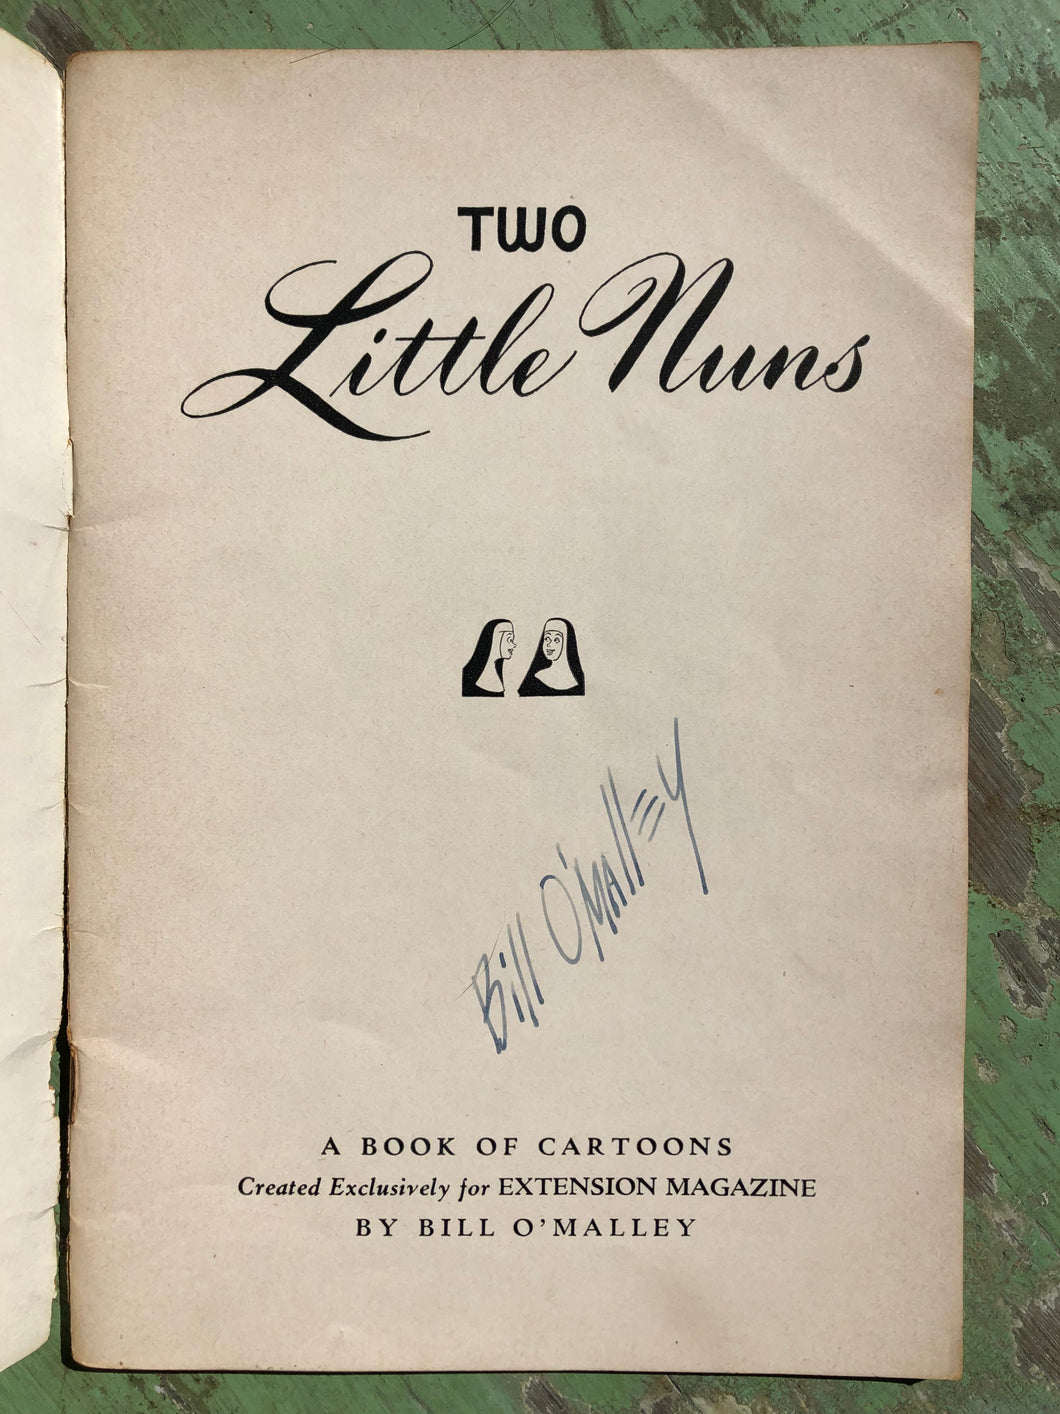 Two Little Nuns. A Book of Cartoons by Bill O’Malley